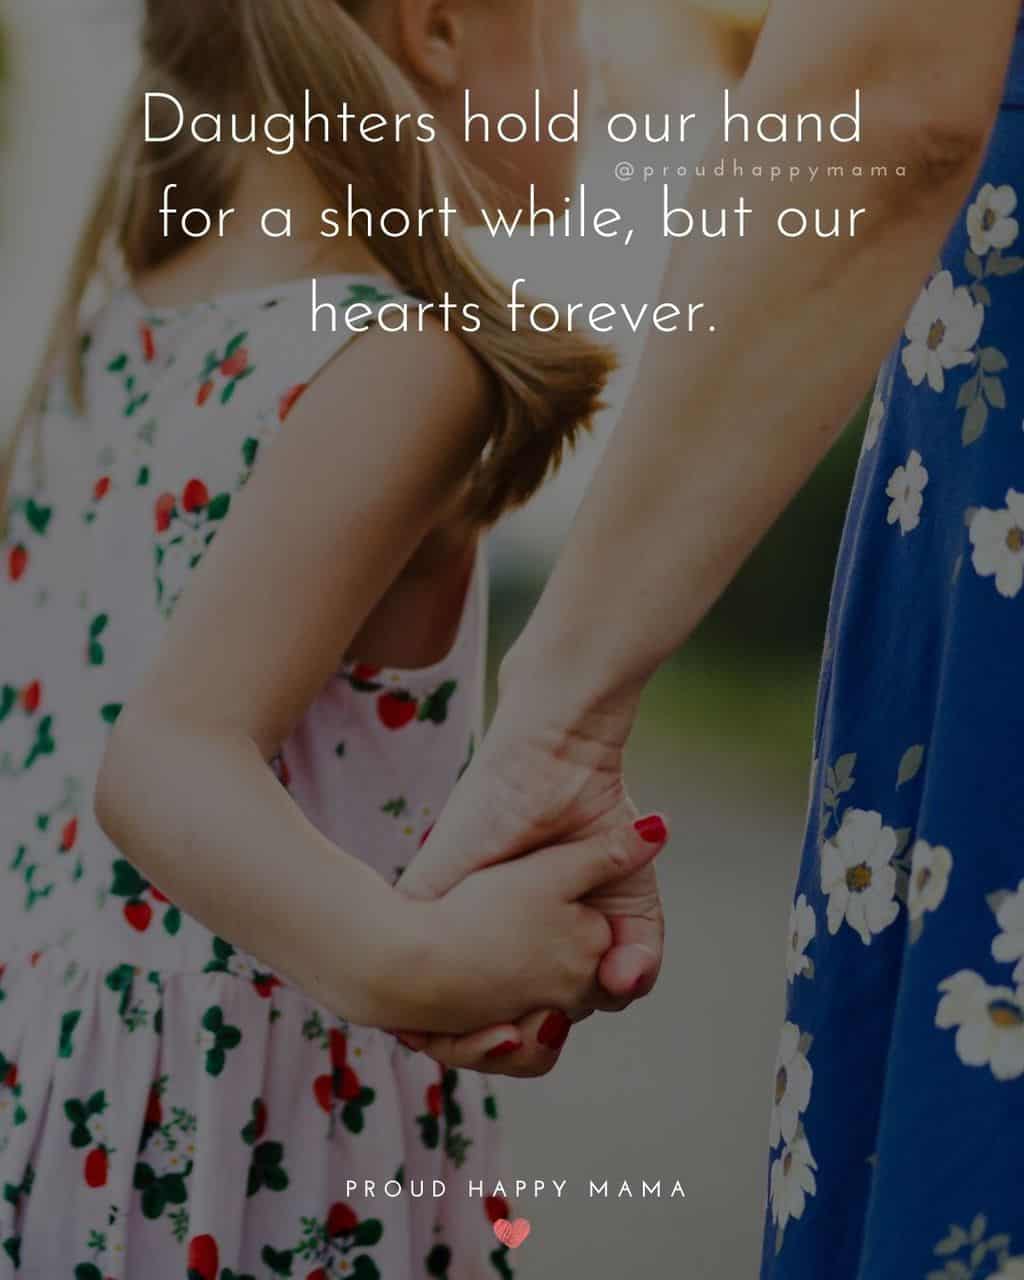 beautiful daughter quotes - ‘Daughters hold our hand for a short while, but our hearts forever.’